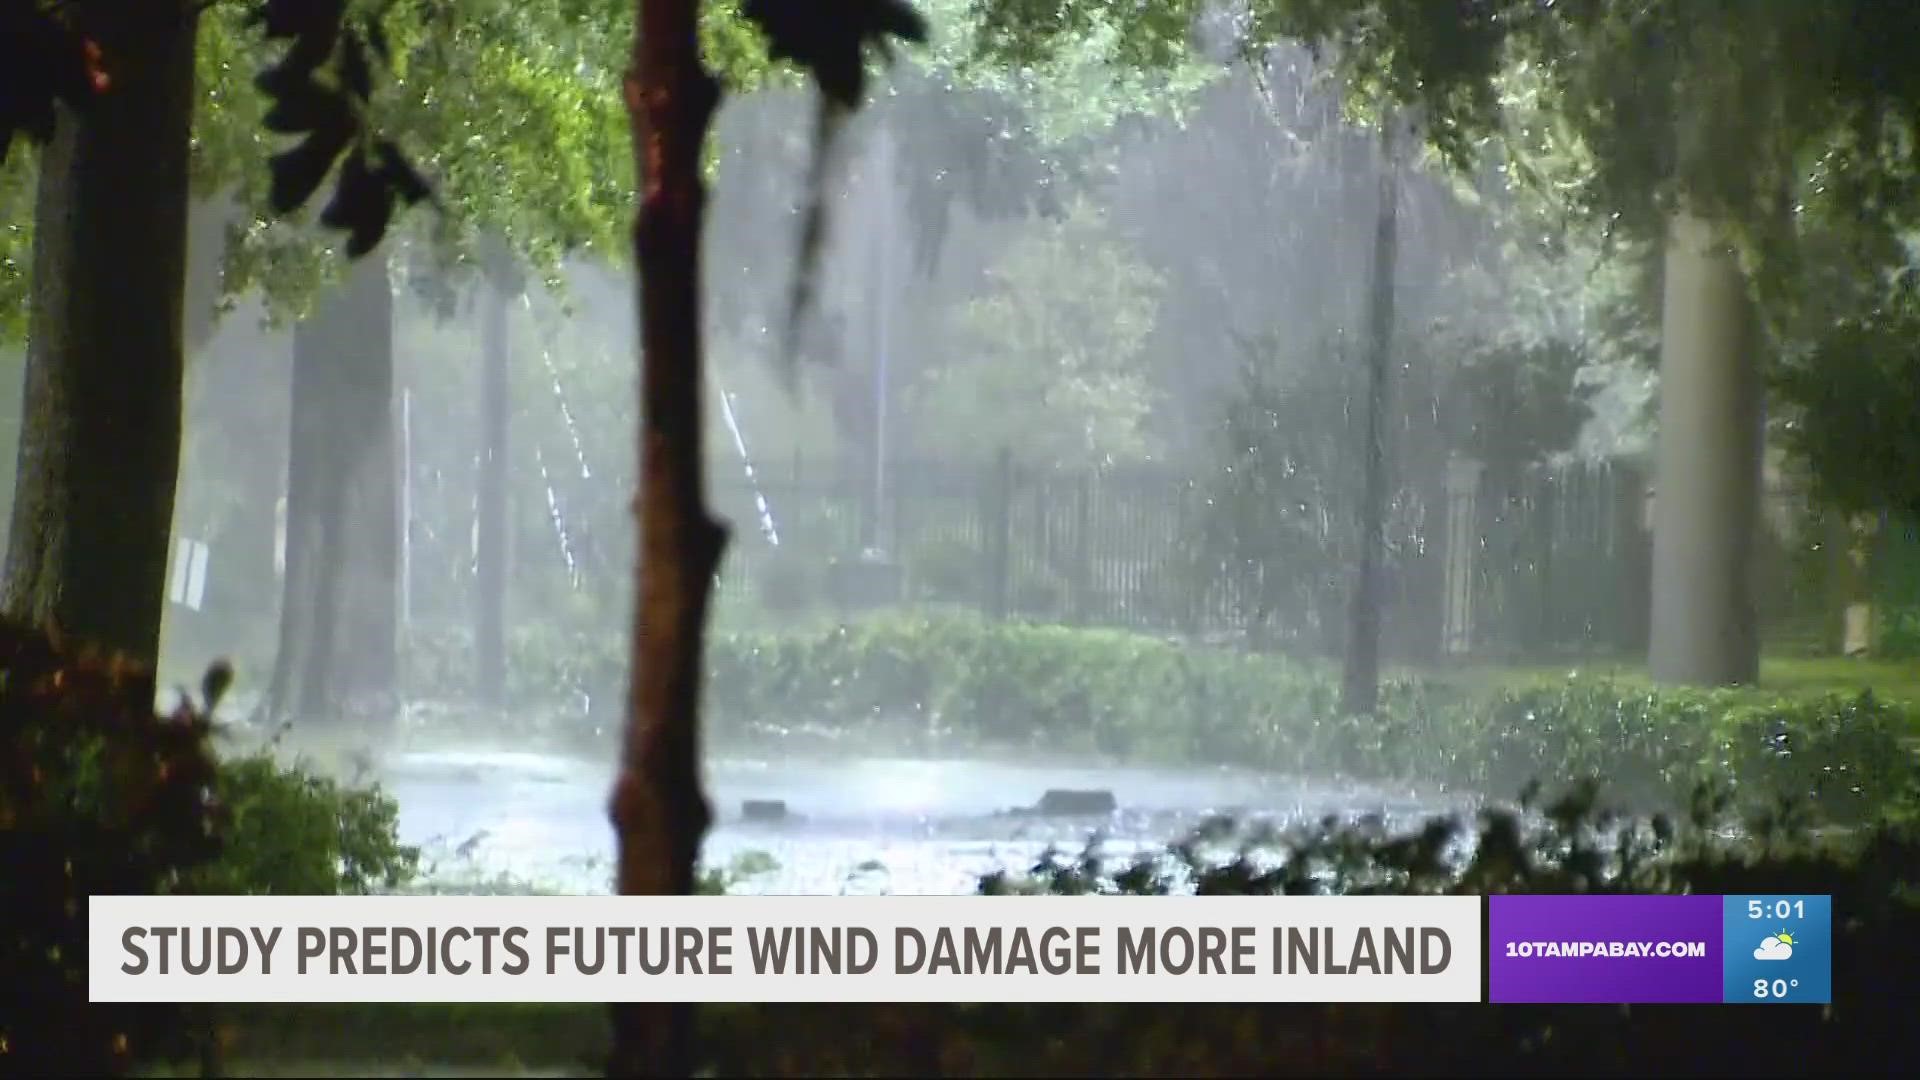 Florida already accounts for about 70 percent of the entire nation's risk for hurricane damage.